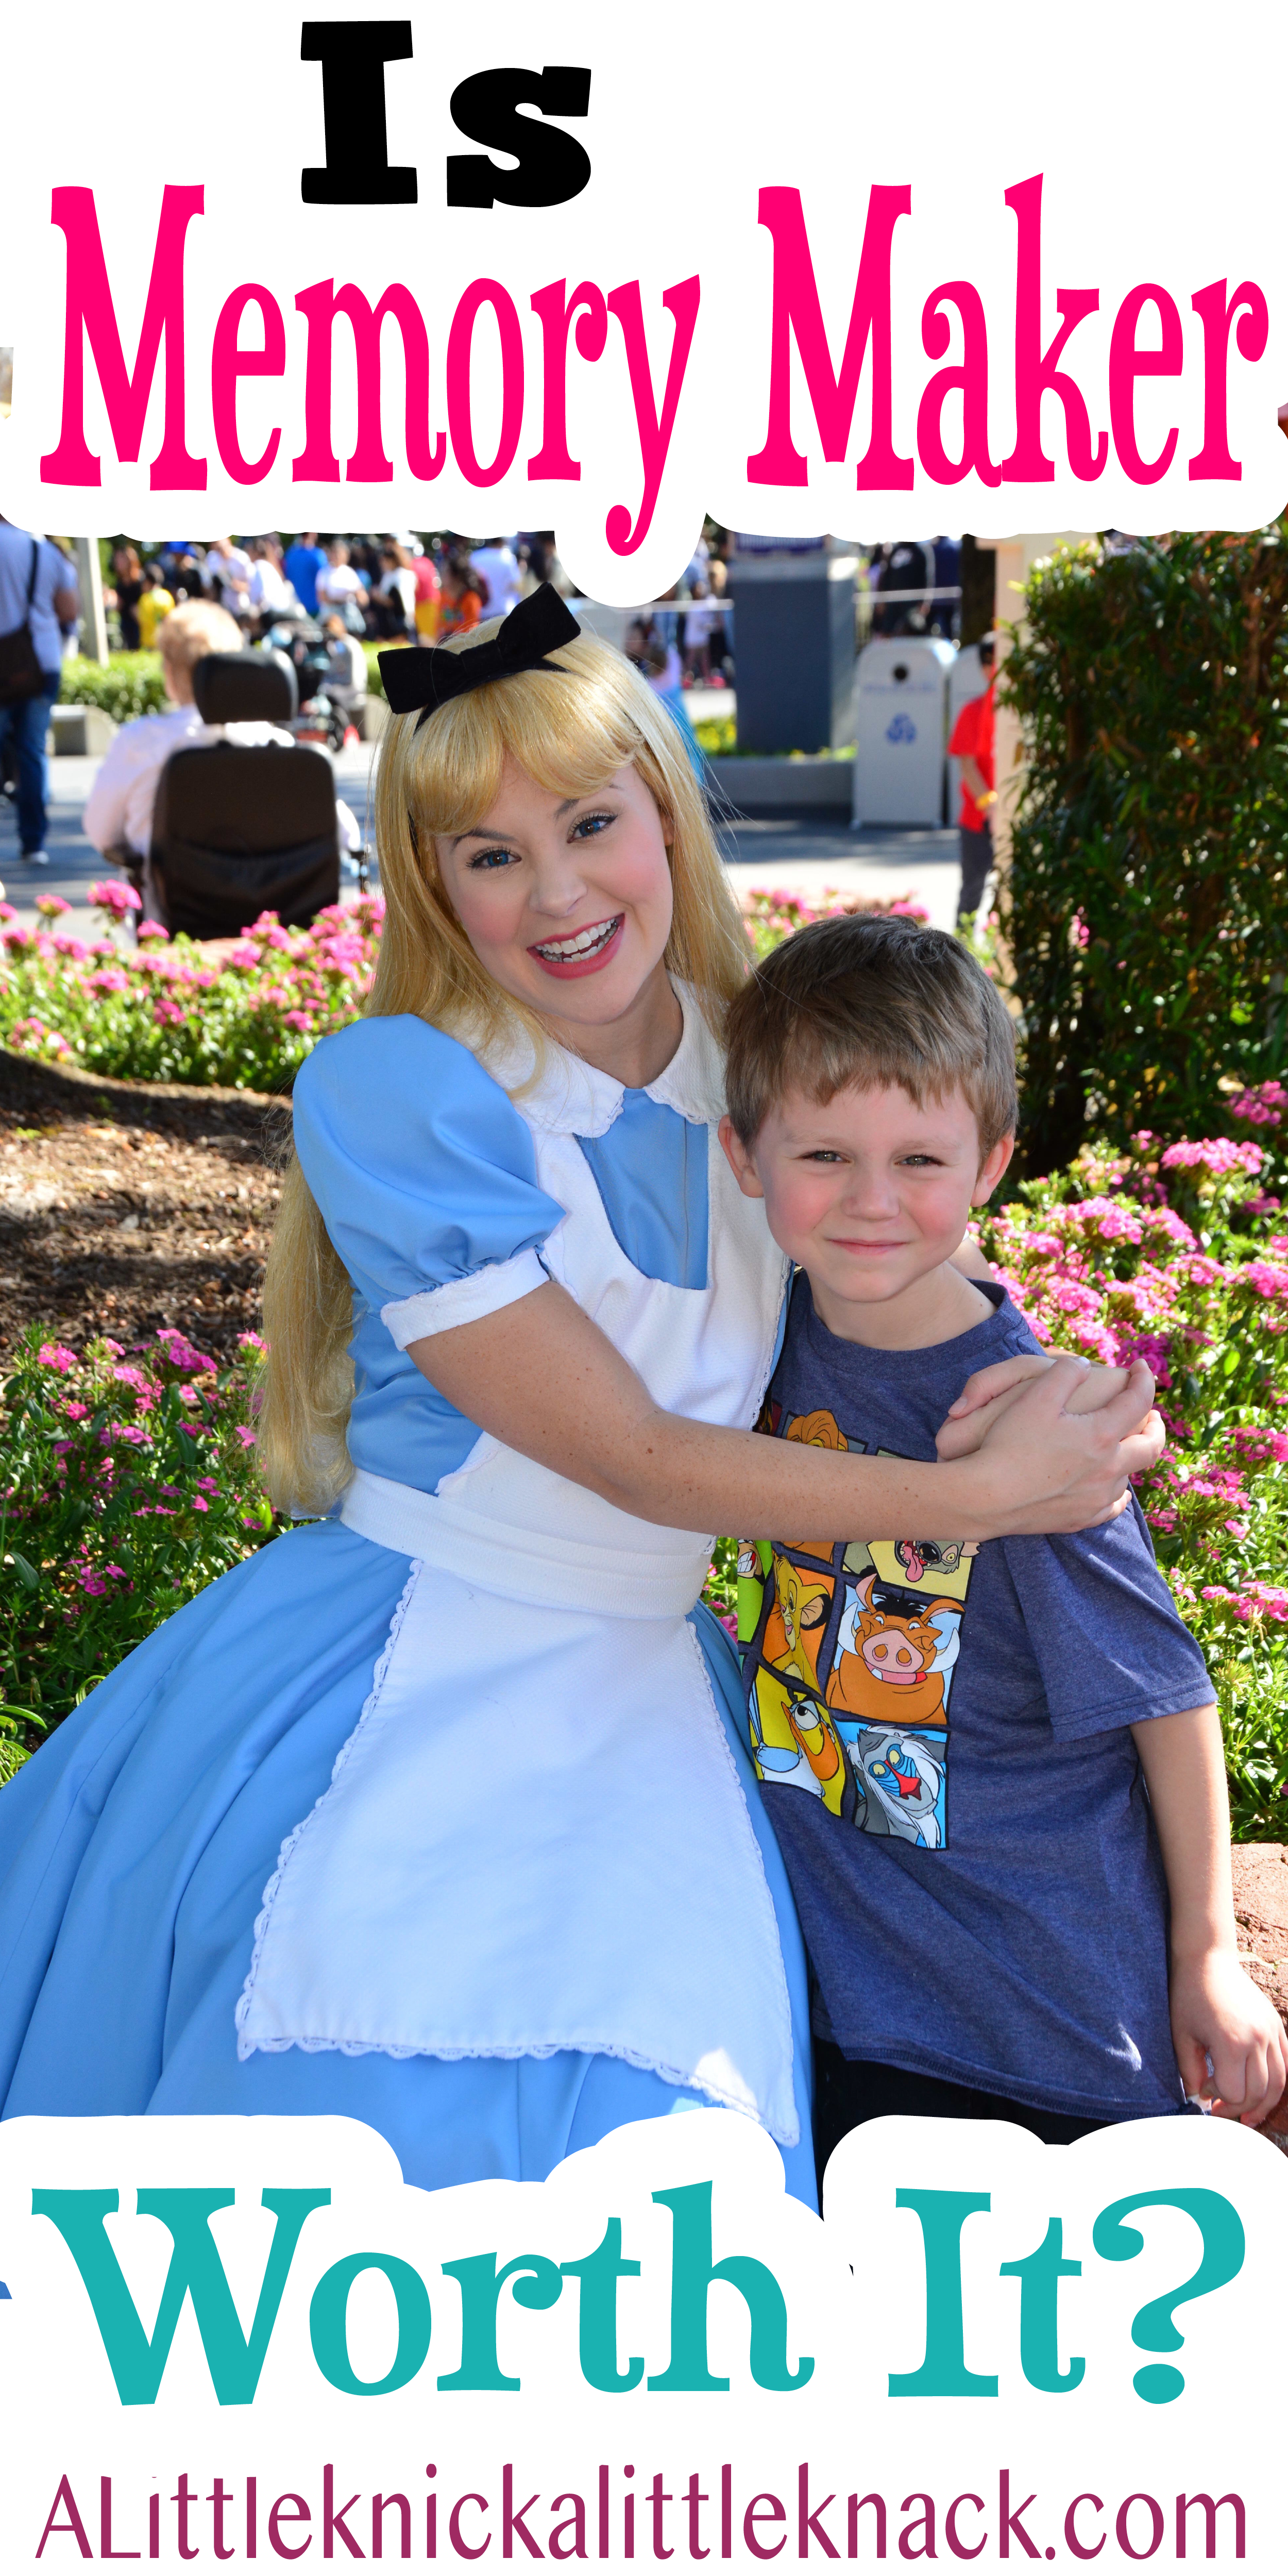 A smiling Alice character and a boy at Disney World. 